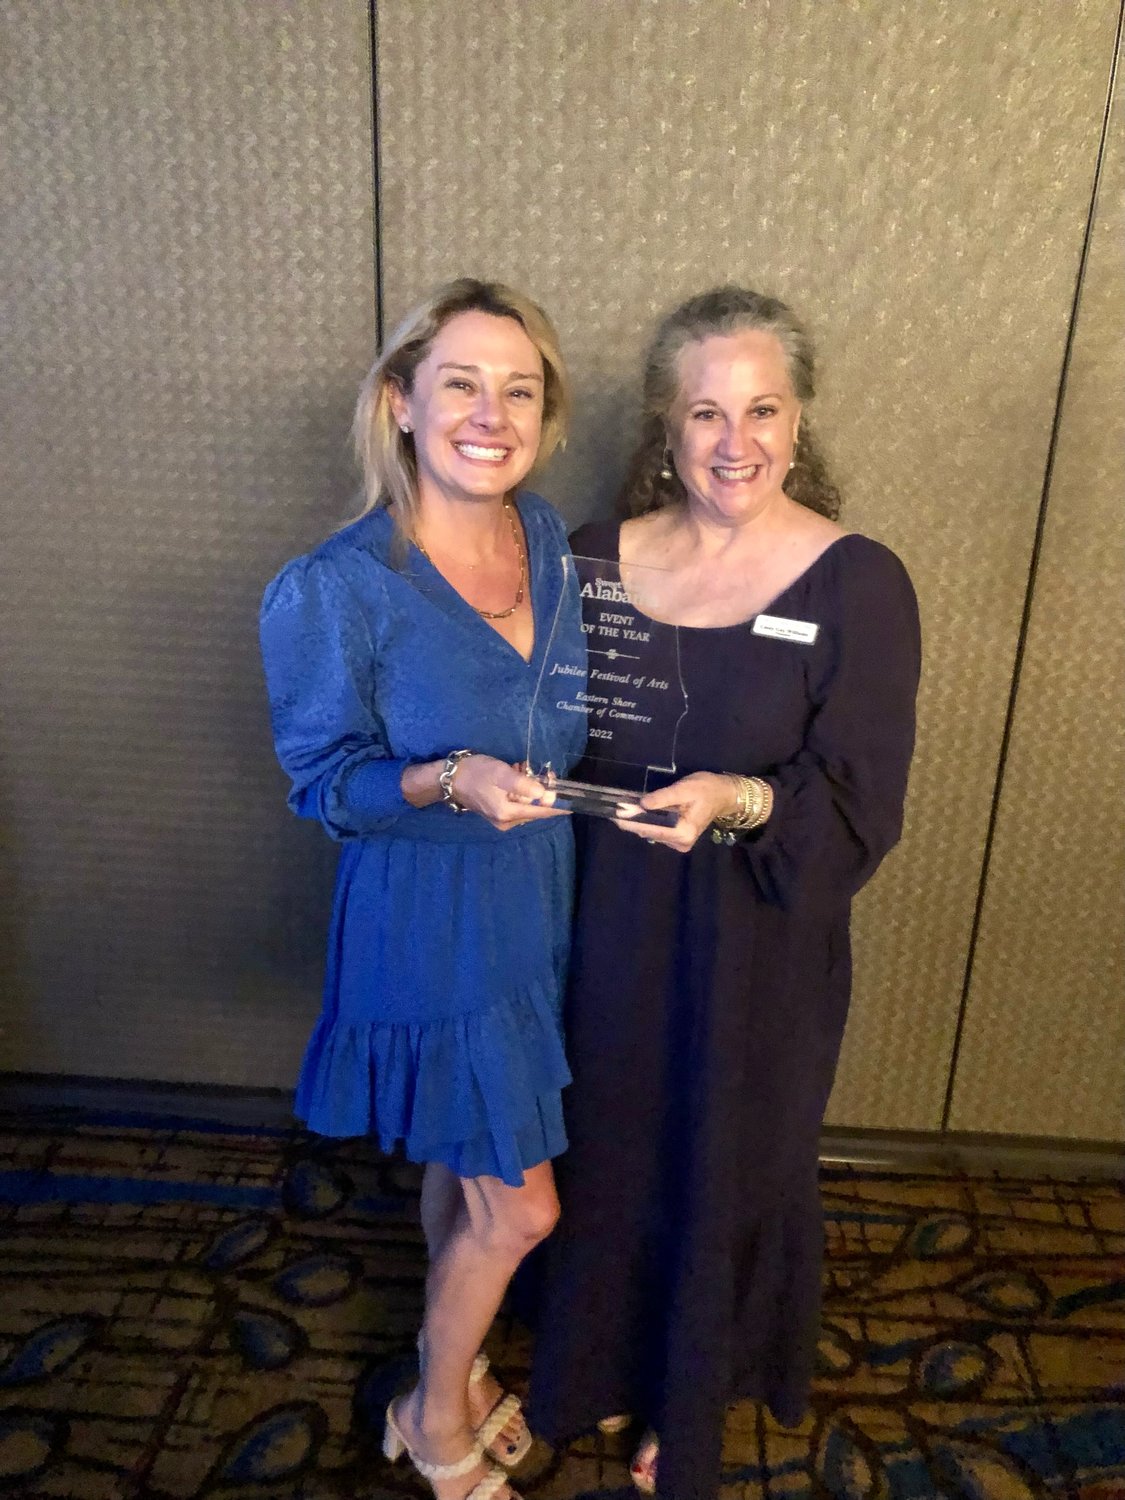 The Eastern Shore Chamber of Commerce’s Jubilee Festival of Arts received the 2022 State of Alabama Tourism Event of the Year Award. Receiving the award are, left, Liz Thomson, chamber director of Tourism and Special Events, and Casey Williams, chamber director.